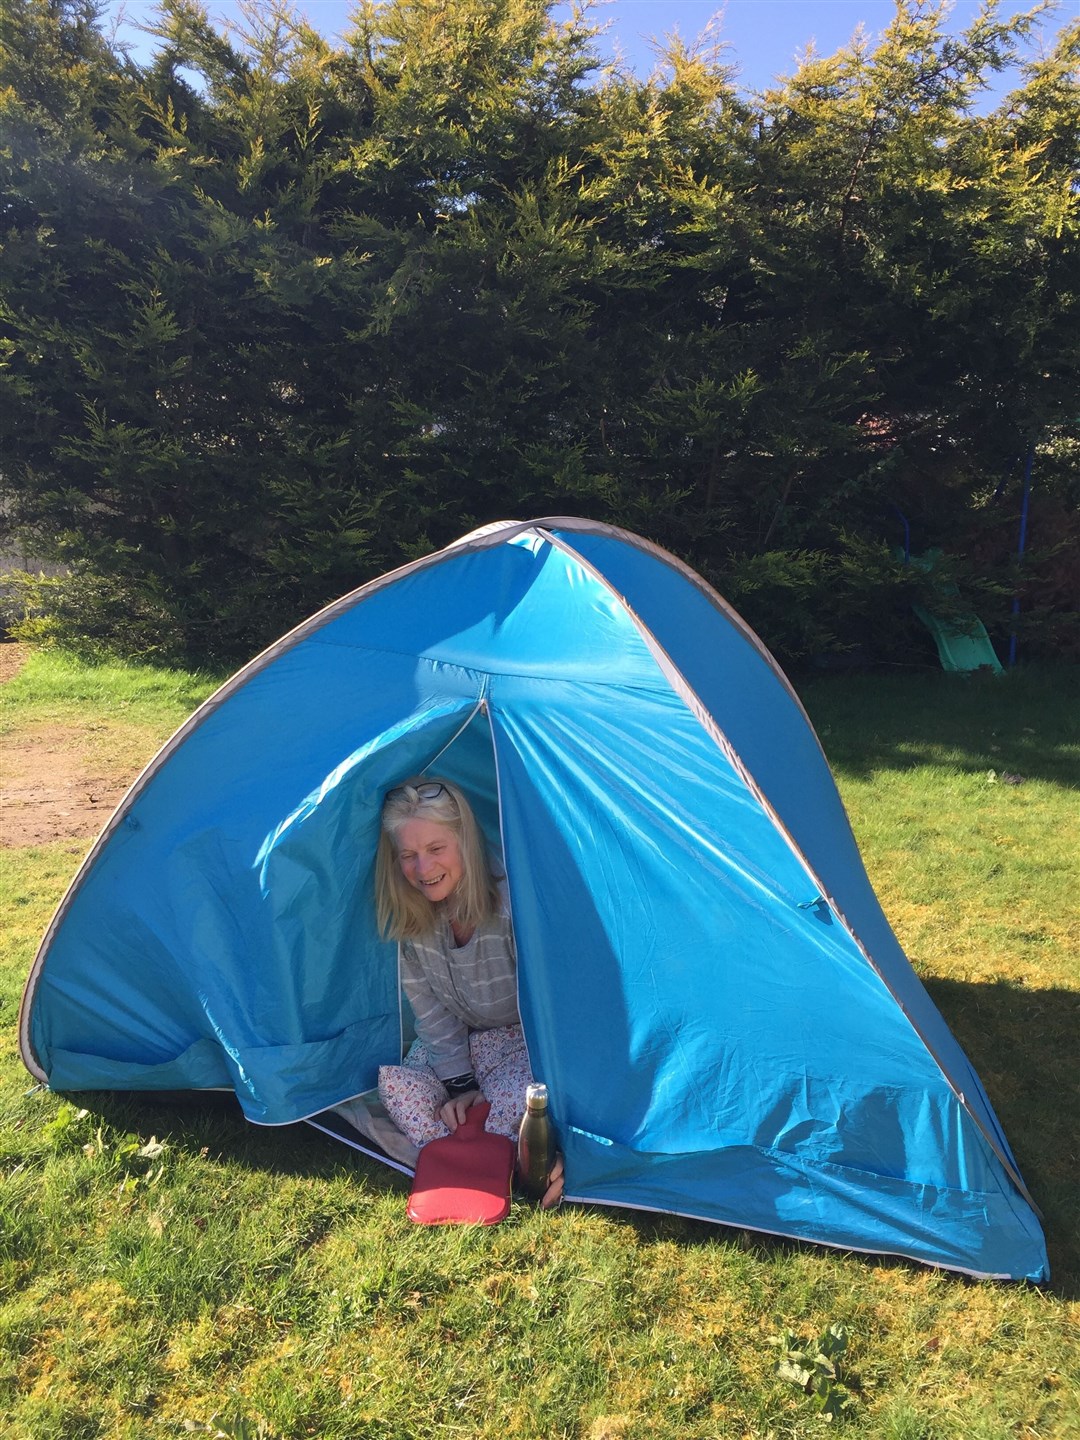 Rona Matheson has been camping in her garden to raise money for the Haven Appeal.